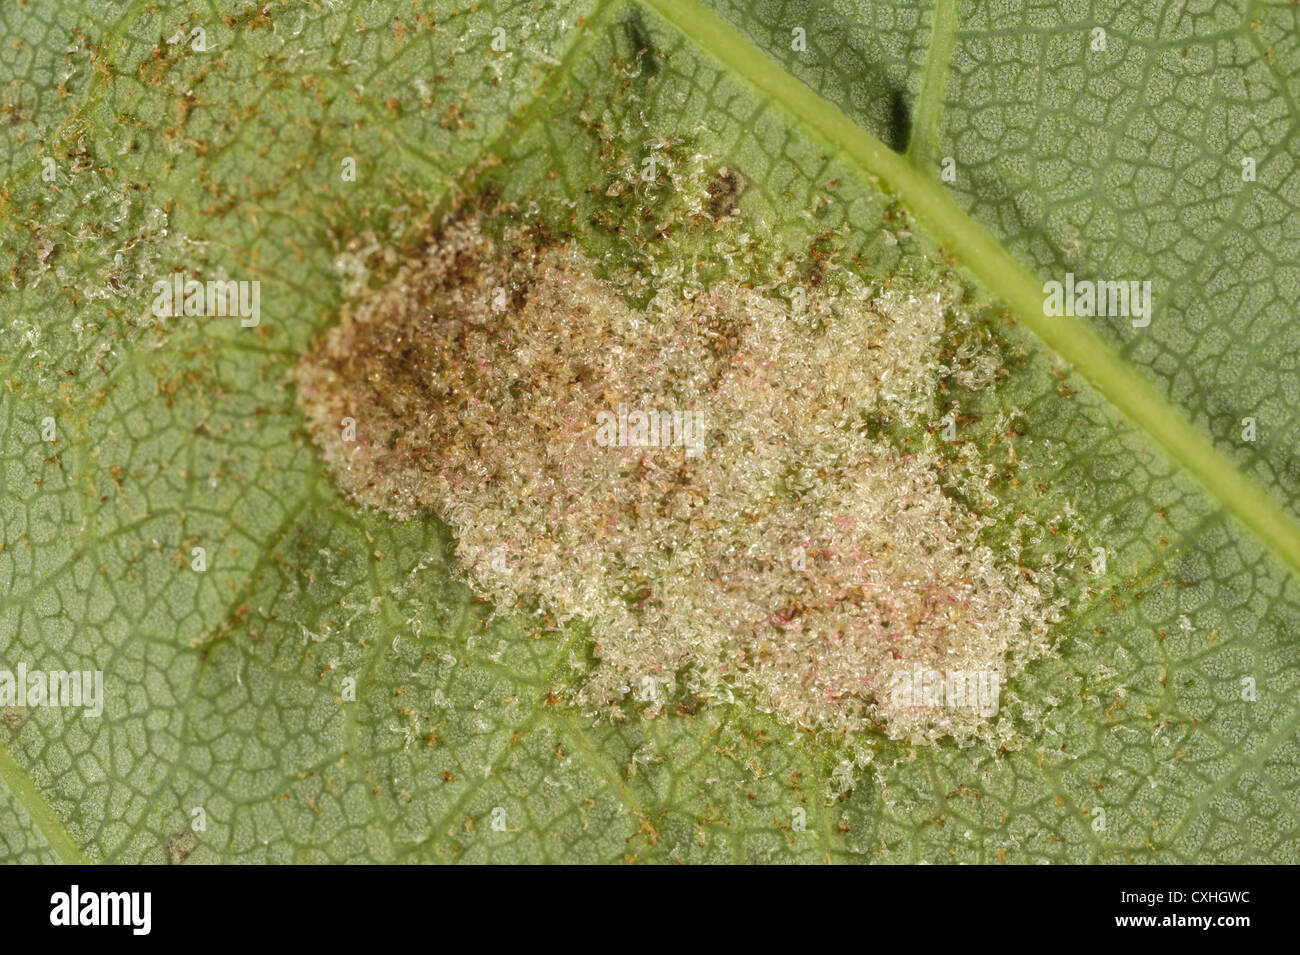 Hairy galls of an eriophyiid mite (Eriophyes sp.) on the underside of a sycamore leaf Stock Photo